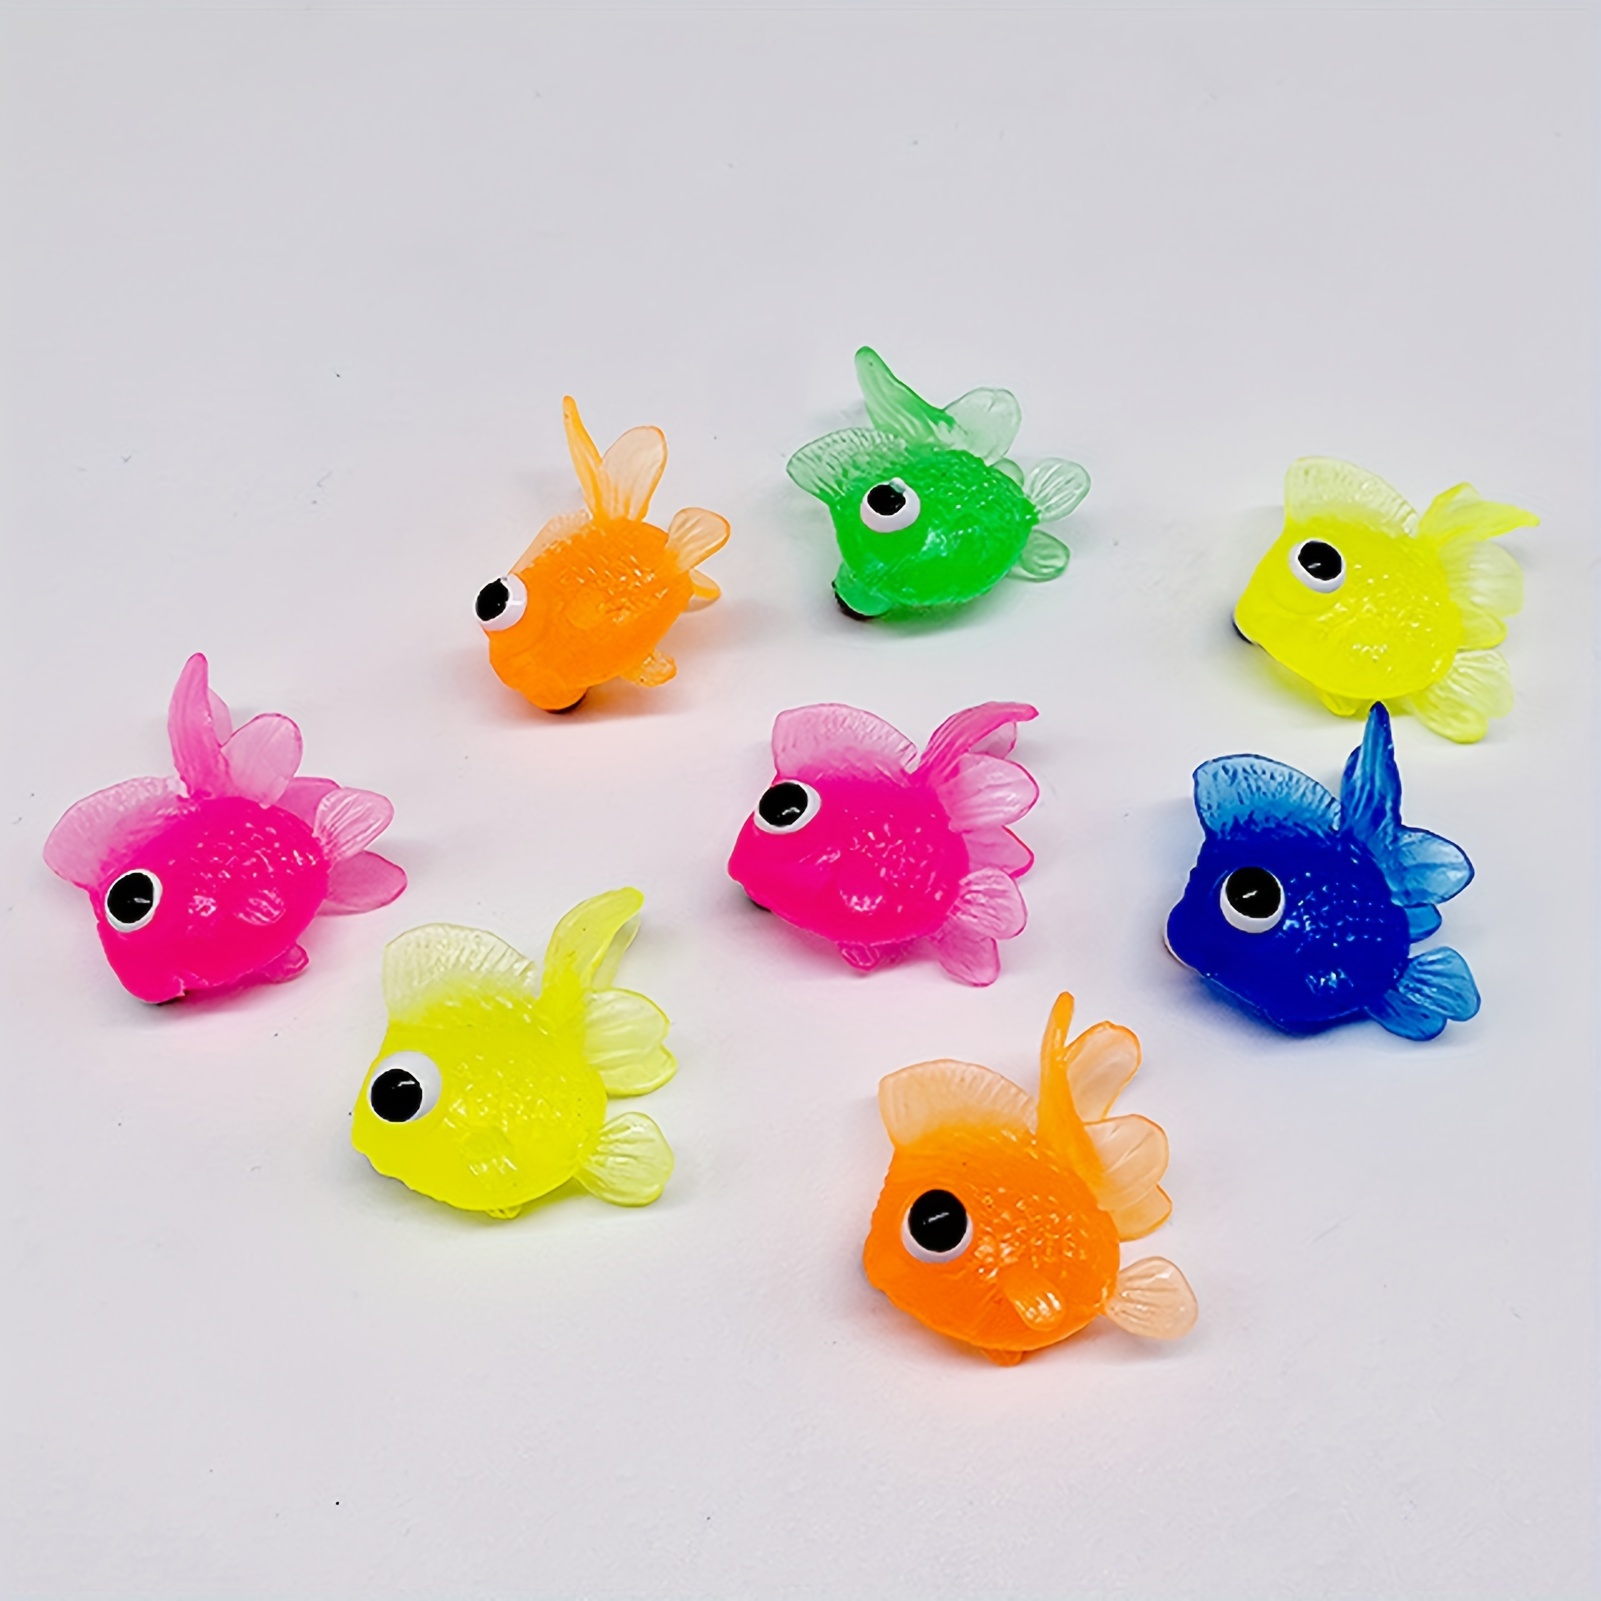 

30pcs Tiny Goldfish Toy Fish Figure Play Set Artificial Moving Floating Colorful Fake Fish Random Color For Party Favors Mini Squishes Toys, Birthday Gift, Classroom Prizes, Goodie Bag Stuffers